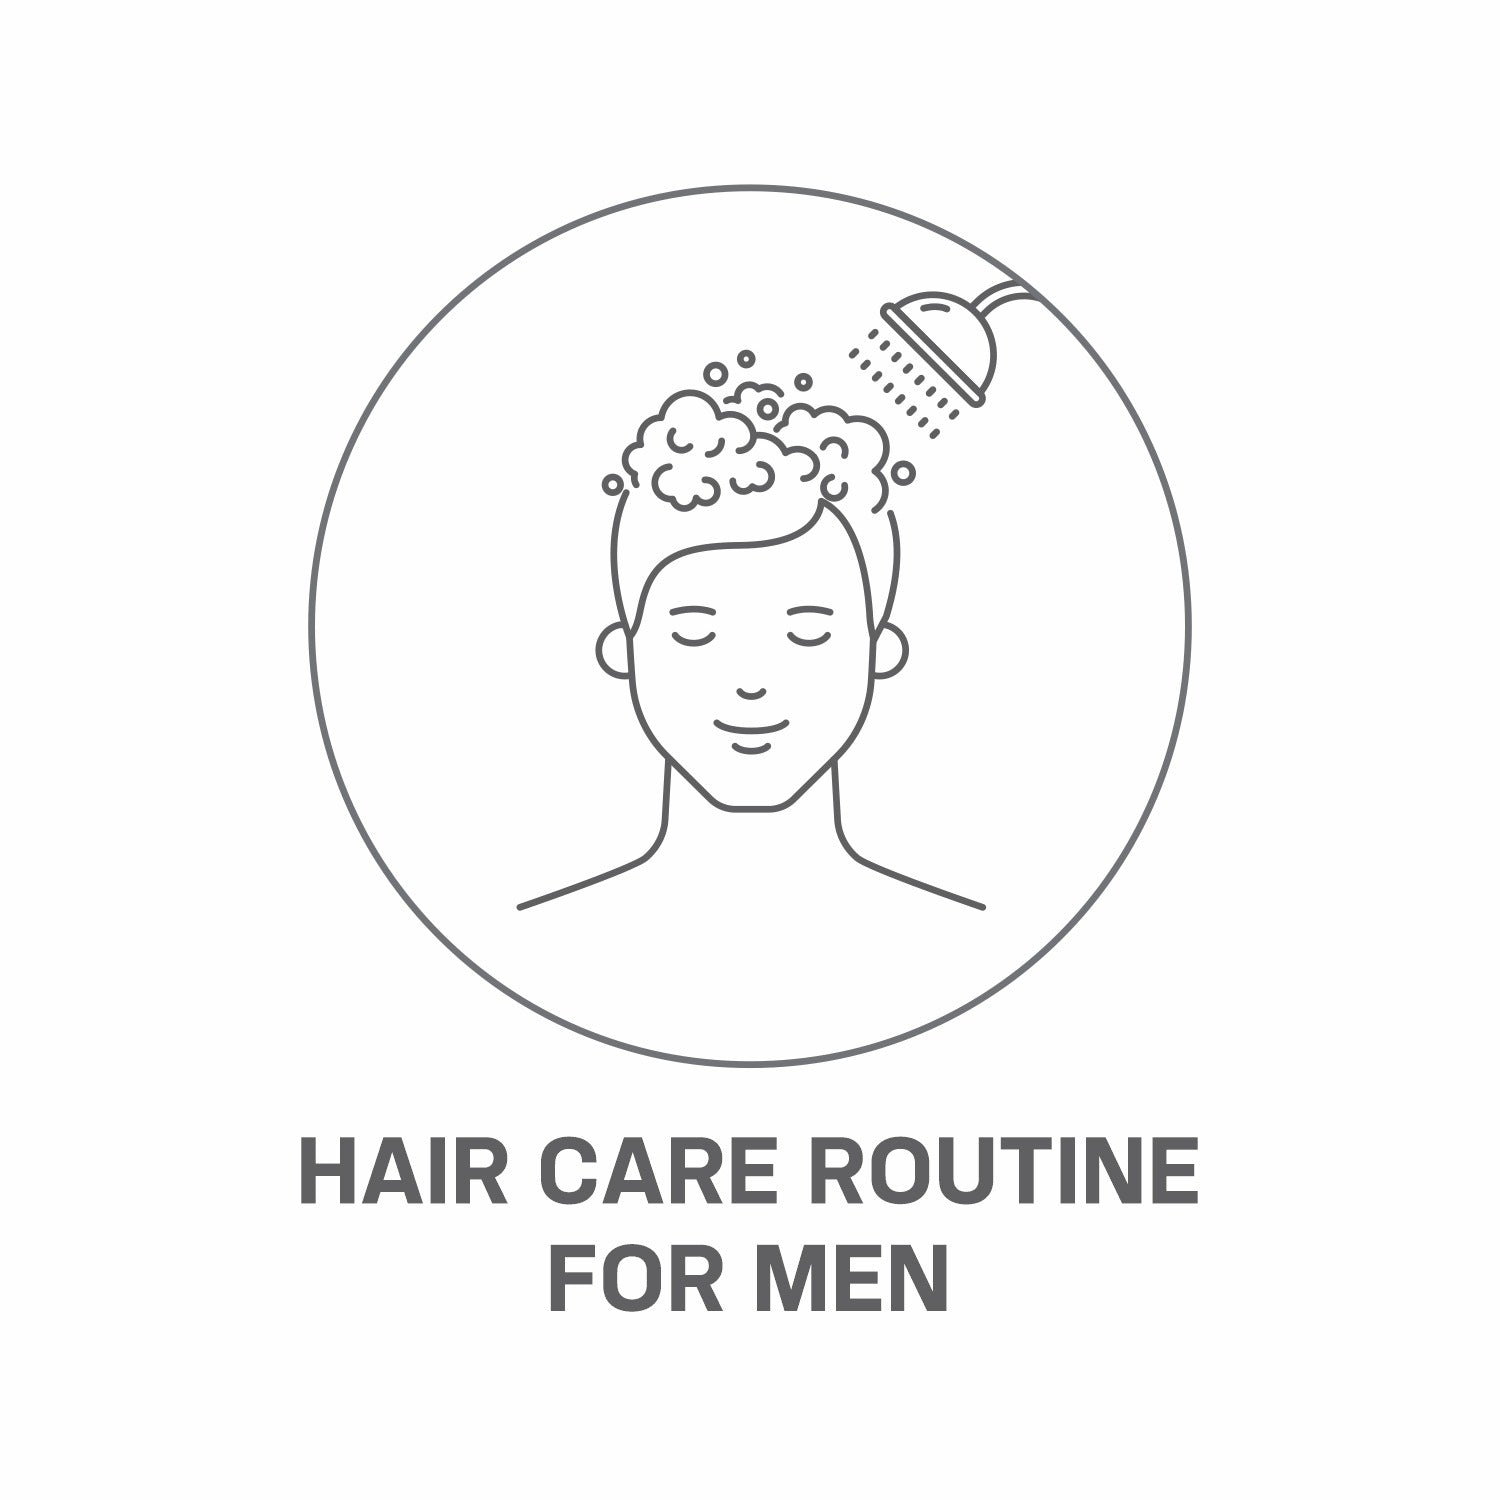 Hair Care Routine For Men